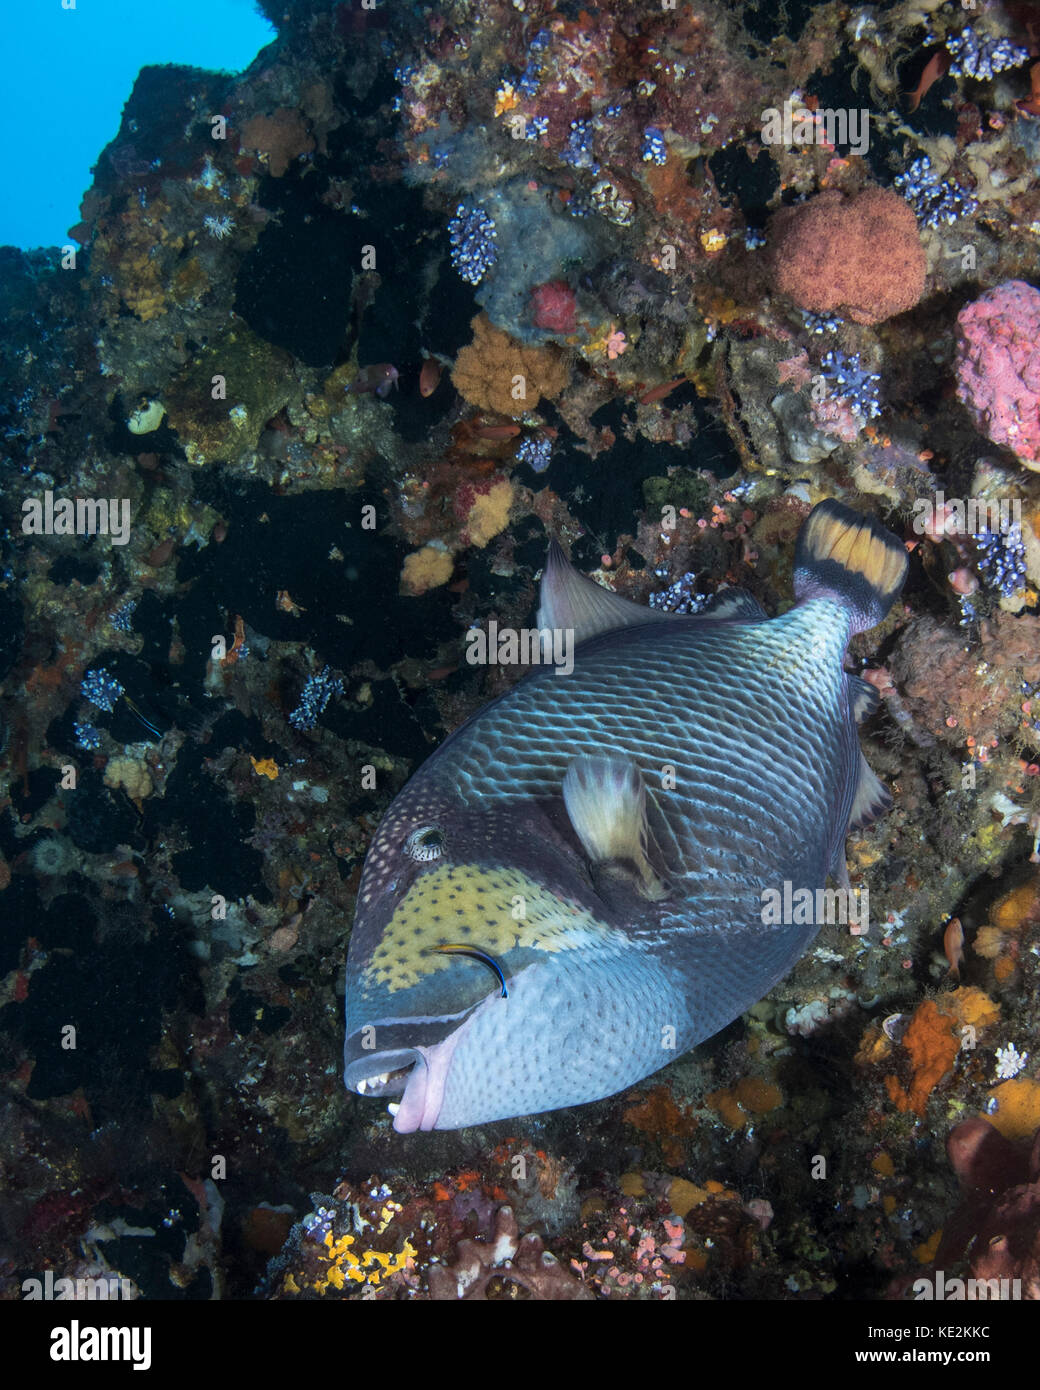 Yellowmargin triggerfish being cleaned by a cleaner wrasse. Stock Photo